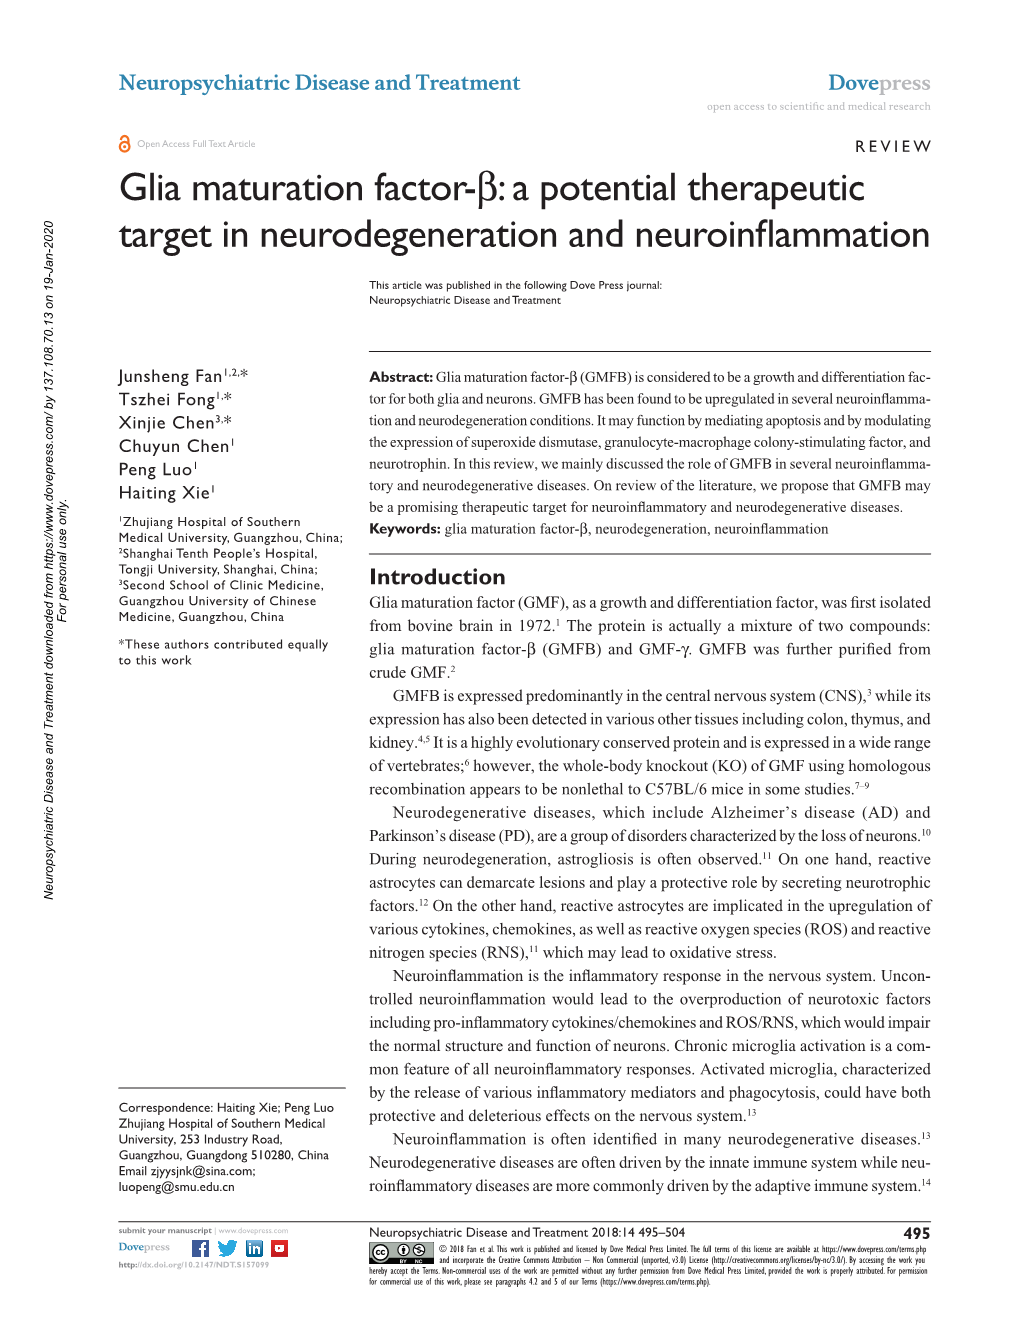 Glia Maturation Factor-Β in Neurodegeneration and Neuroinflammation Open Access to Scientific and Medical Research DOI